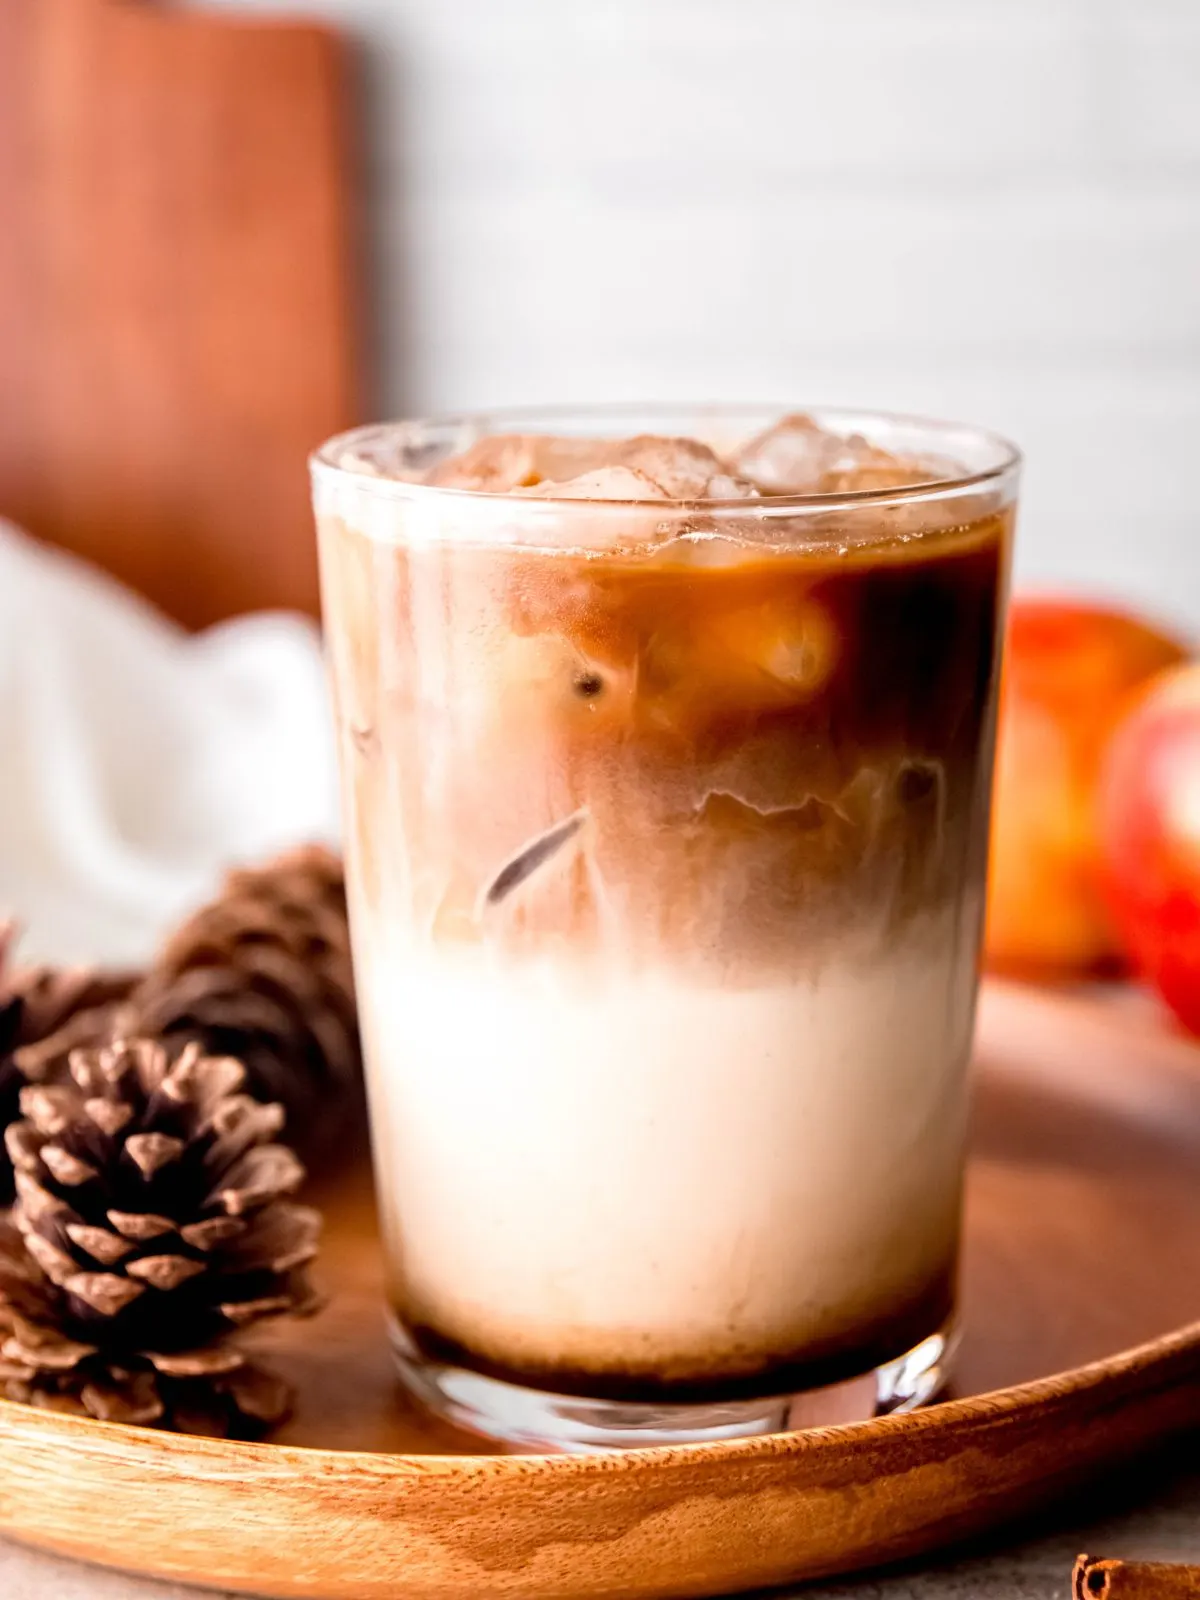 A glass of iced coffee with apples and pine cones.